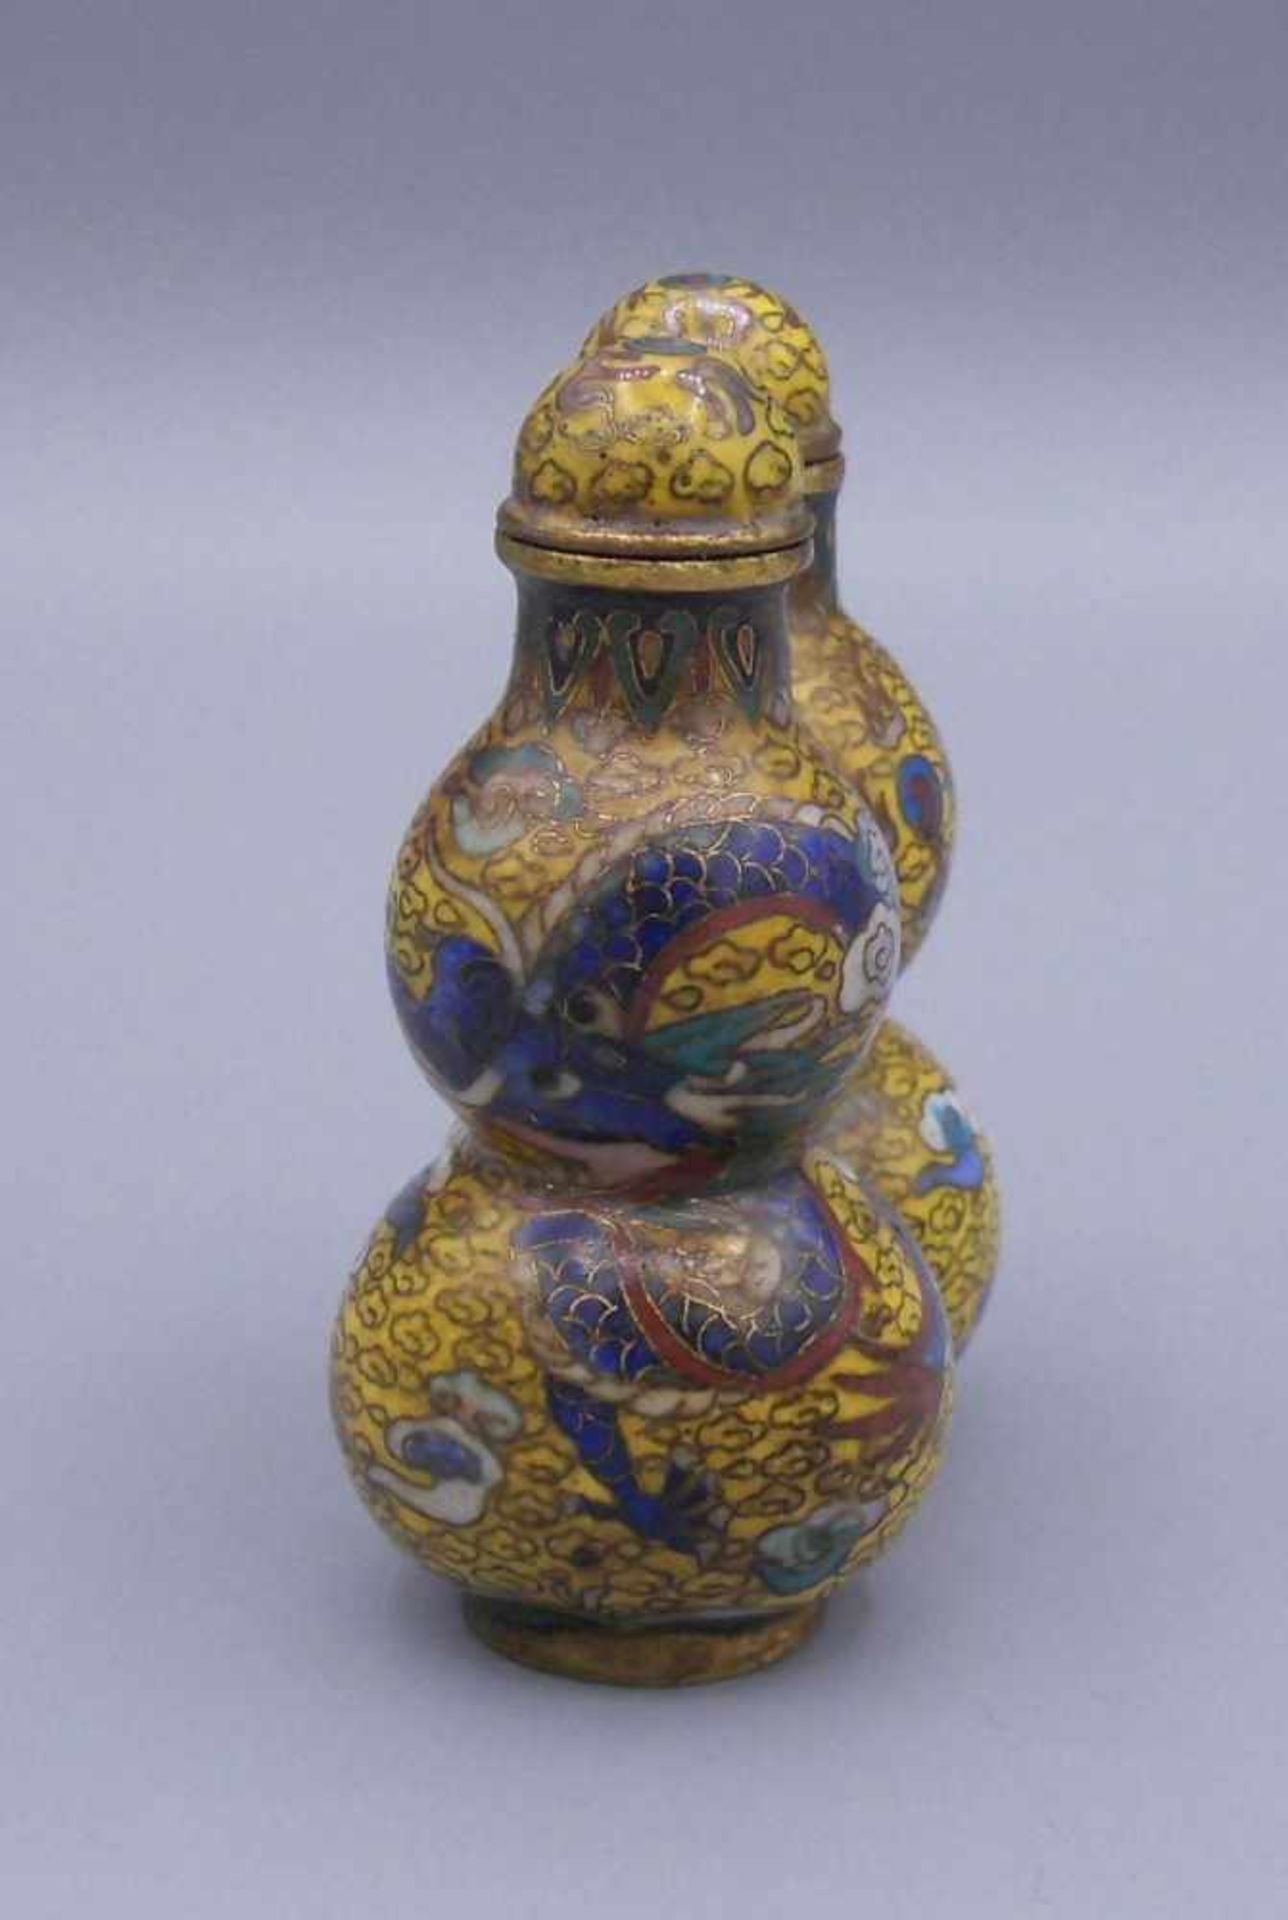 CLOISONNÉ - SNUFFBOTTLE / DOPPEL-SCHNUPFTABAKBEHÄLTER, China, Emaille über Messing. Doppel- - Image 4 of 7